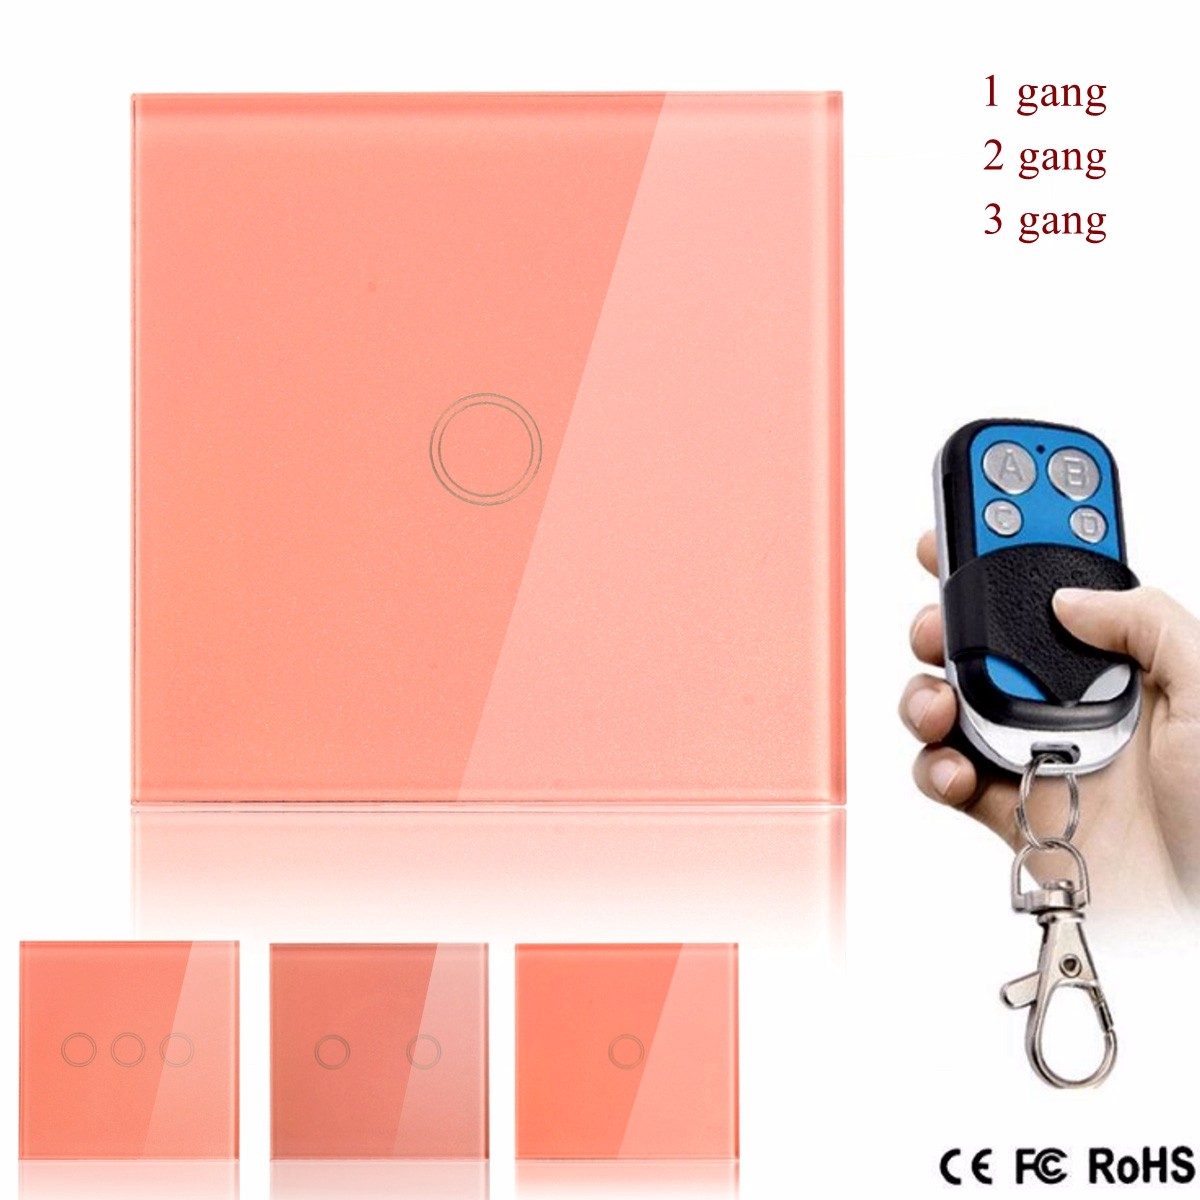 1-Gang2-Gang3-Gang-Light-Switch-Wall-Switch-Remote-Control-Touch-Switch-AC110V-240V-1123884